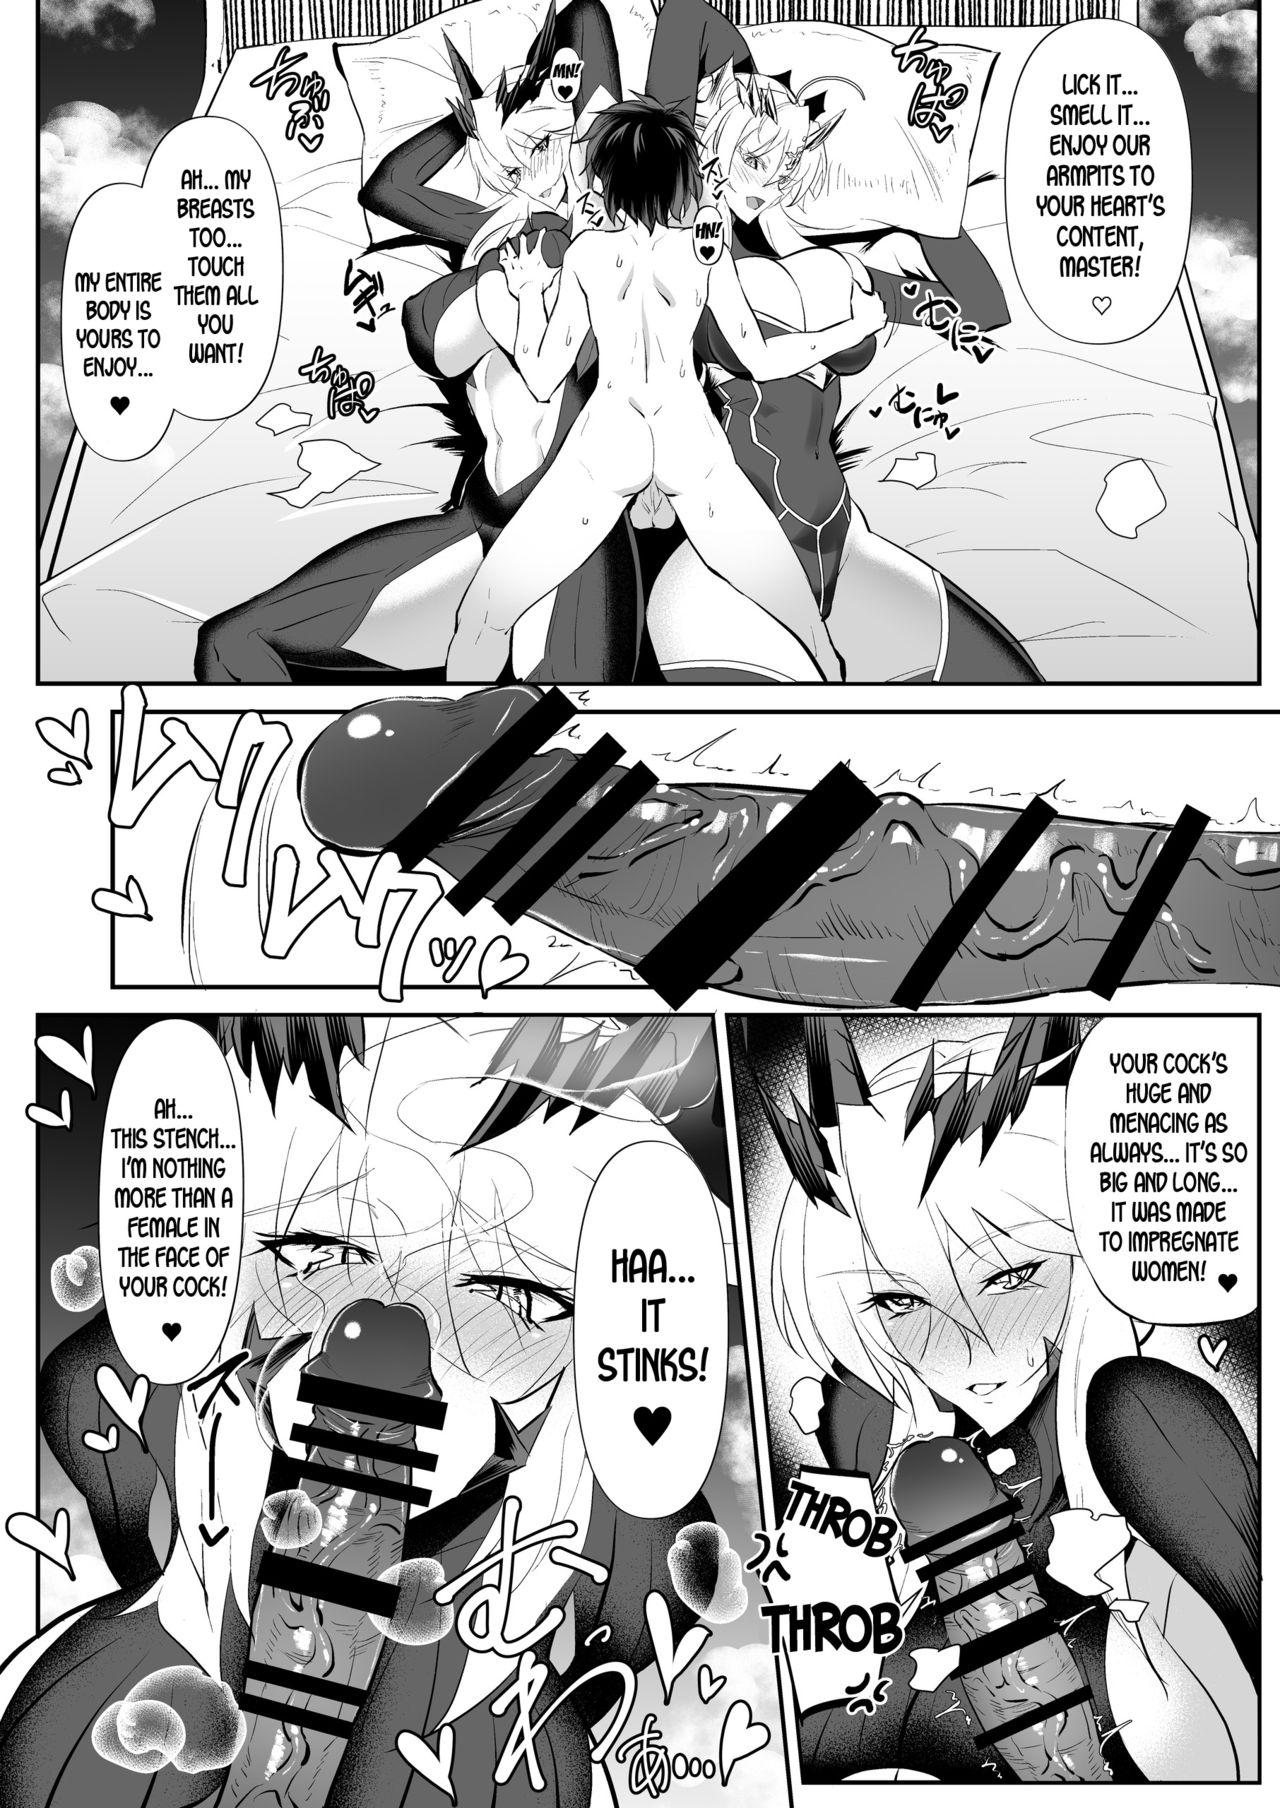 Old Young Altrias true LOVE - Fate grand order Classroom - Page 9